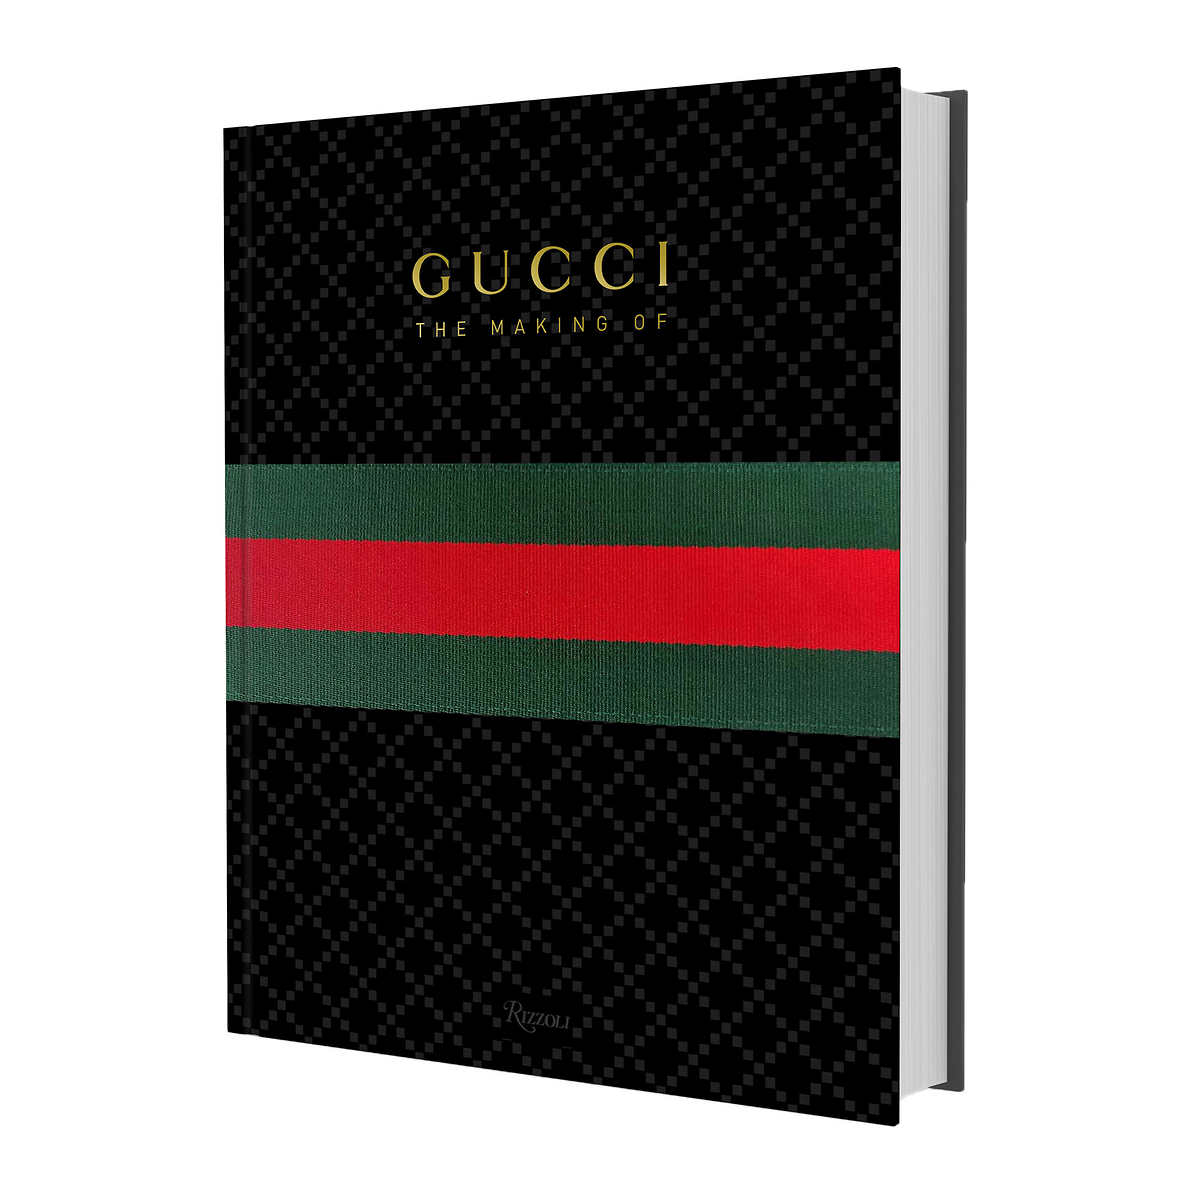 Gucci Inspired Wrapping Paper, Gucci Gift Wrap, Custom Gift Wrap